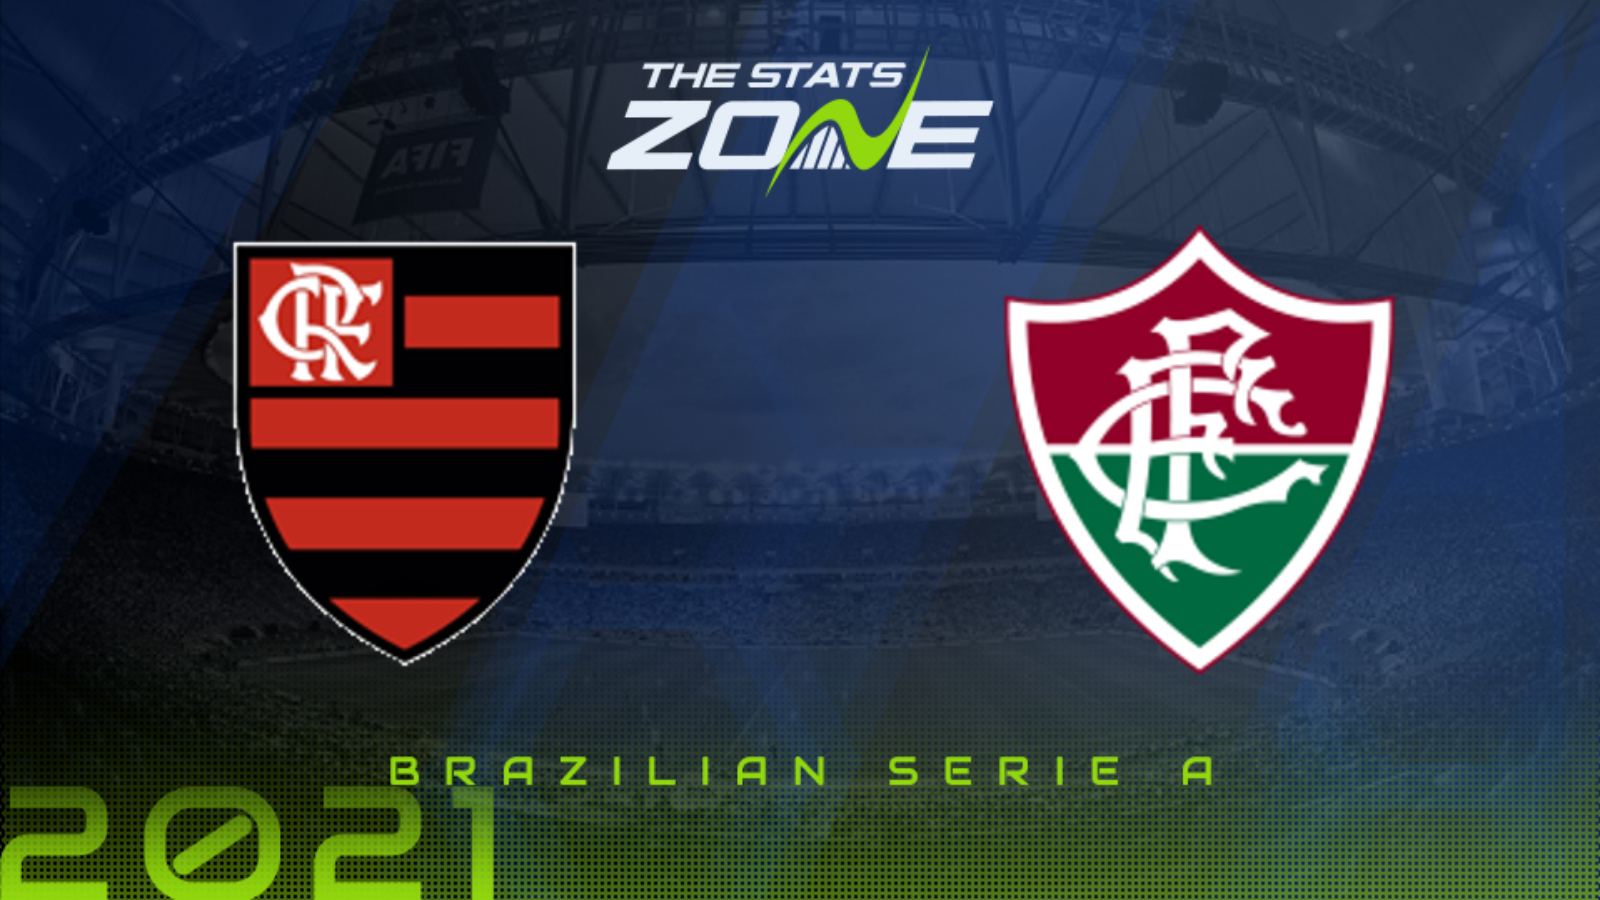 Flamengo Vs Fluminense Flamengo Vs Fluminense Resultado Resumen Y Goles Del H2h Stats Prediction Live Score Live Odds Result In One Place Yvonne Smiles